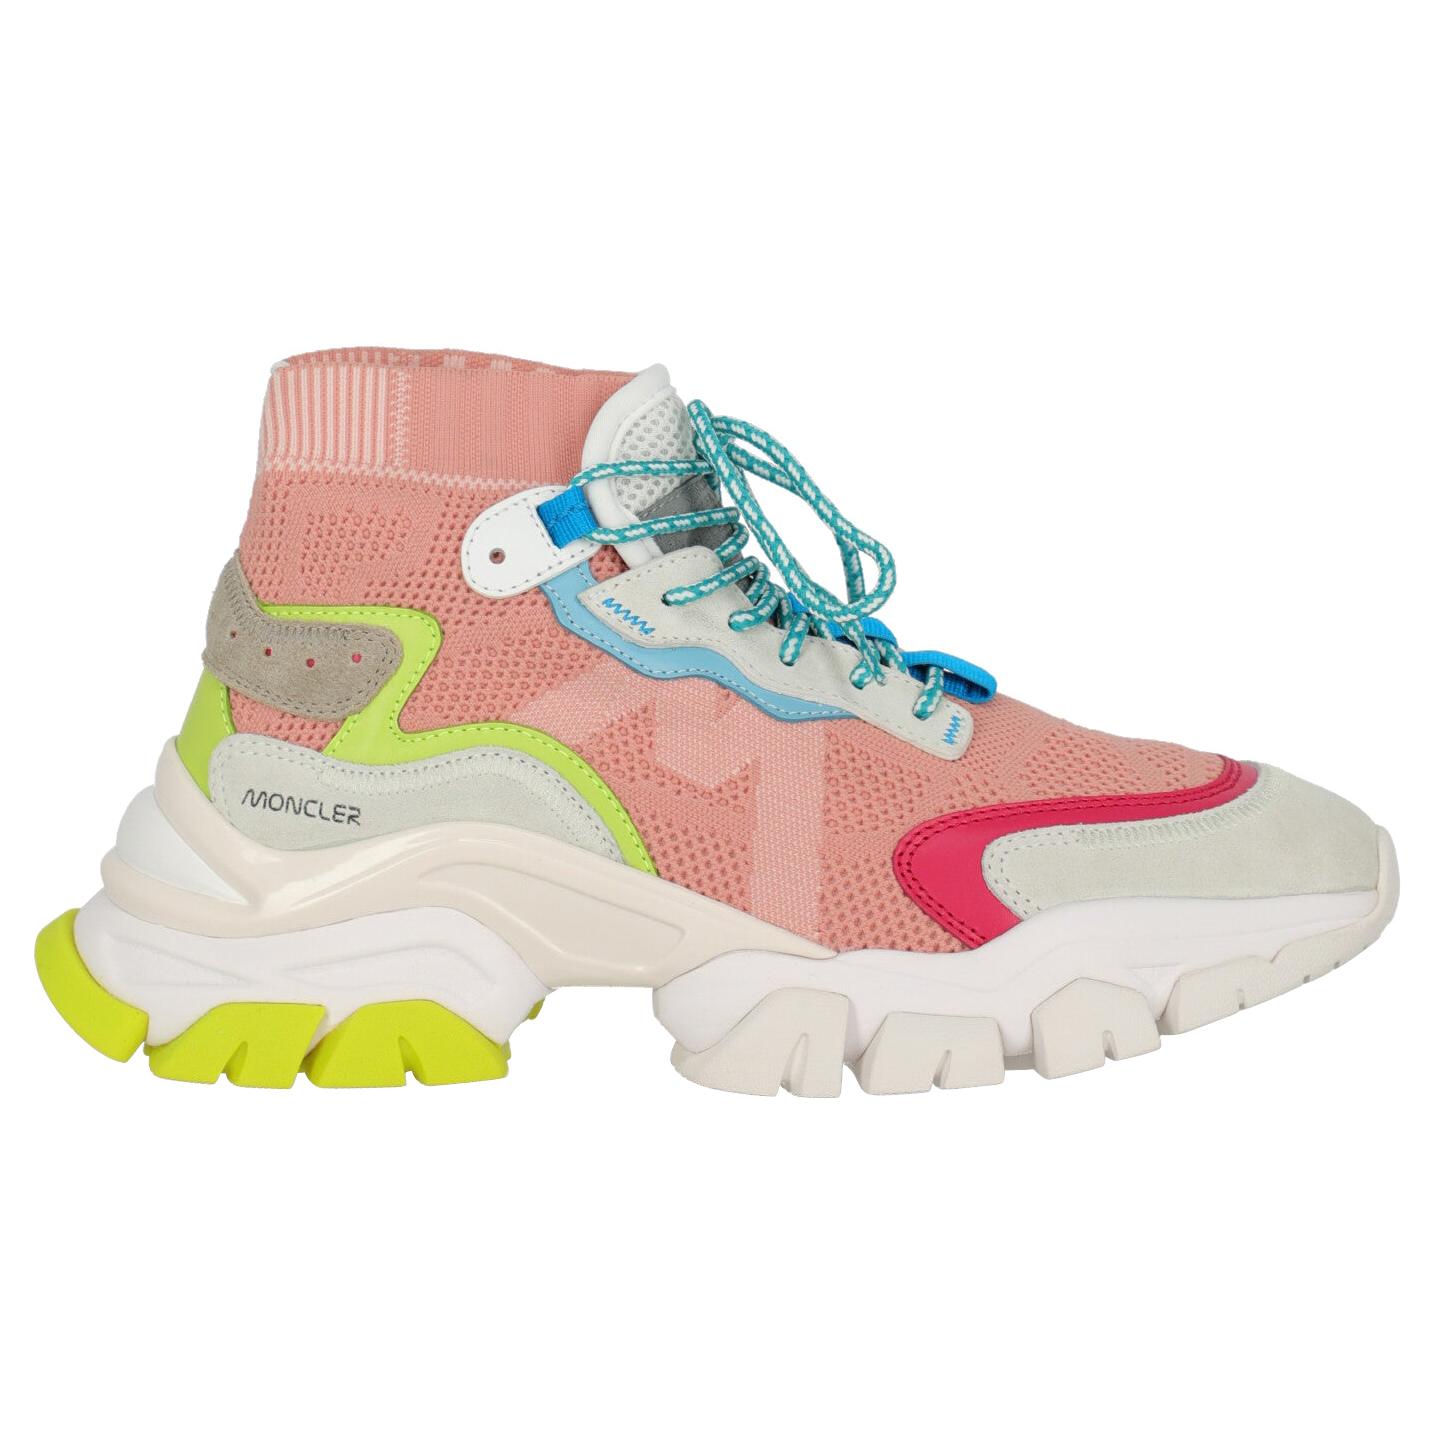 Moncler  Women   Sneakers  Multicolor, Pink, White Synthetic Fibers EU 38 For Sale